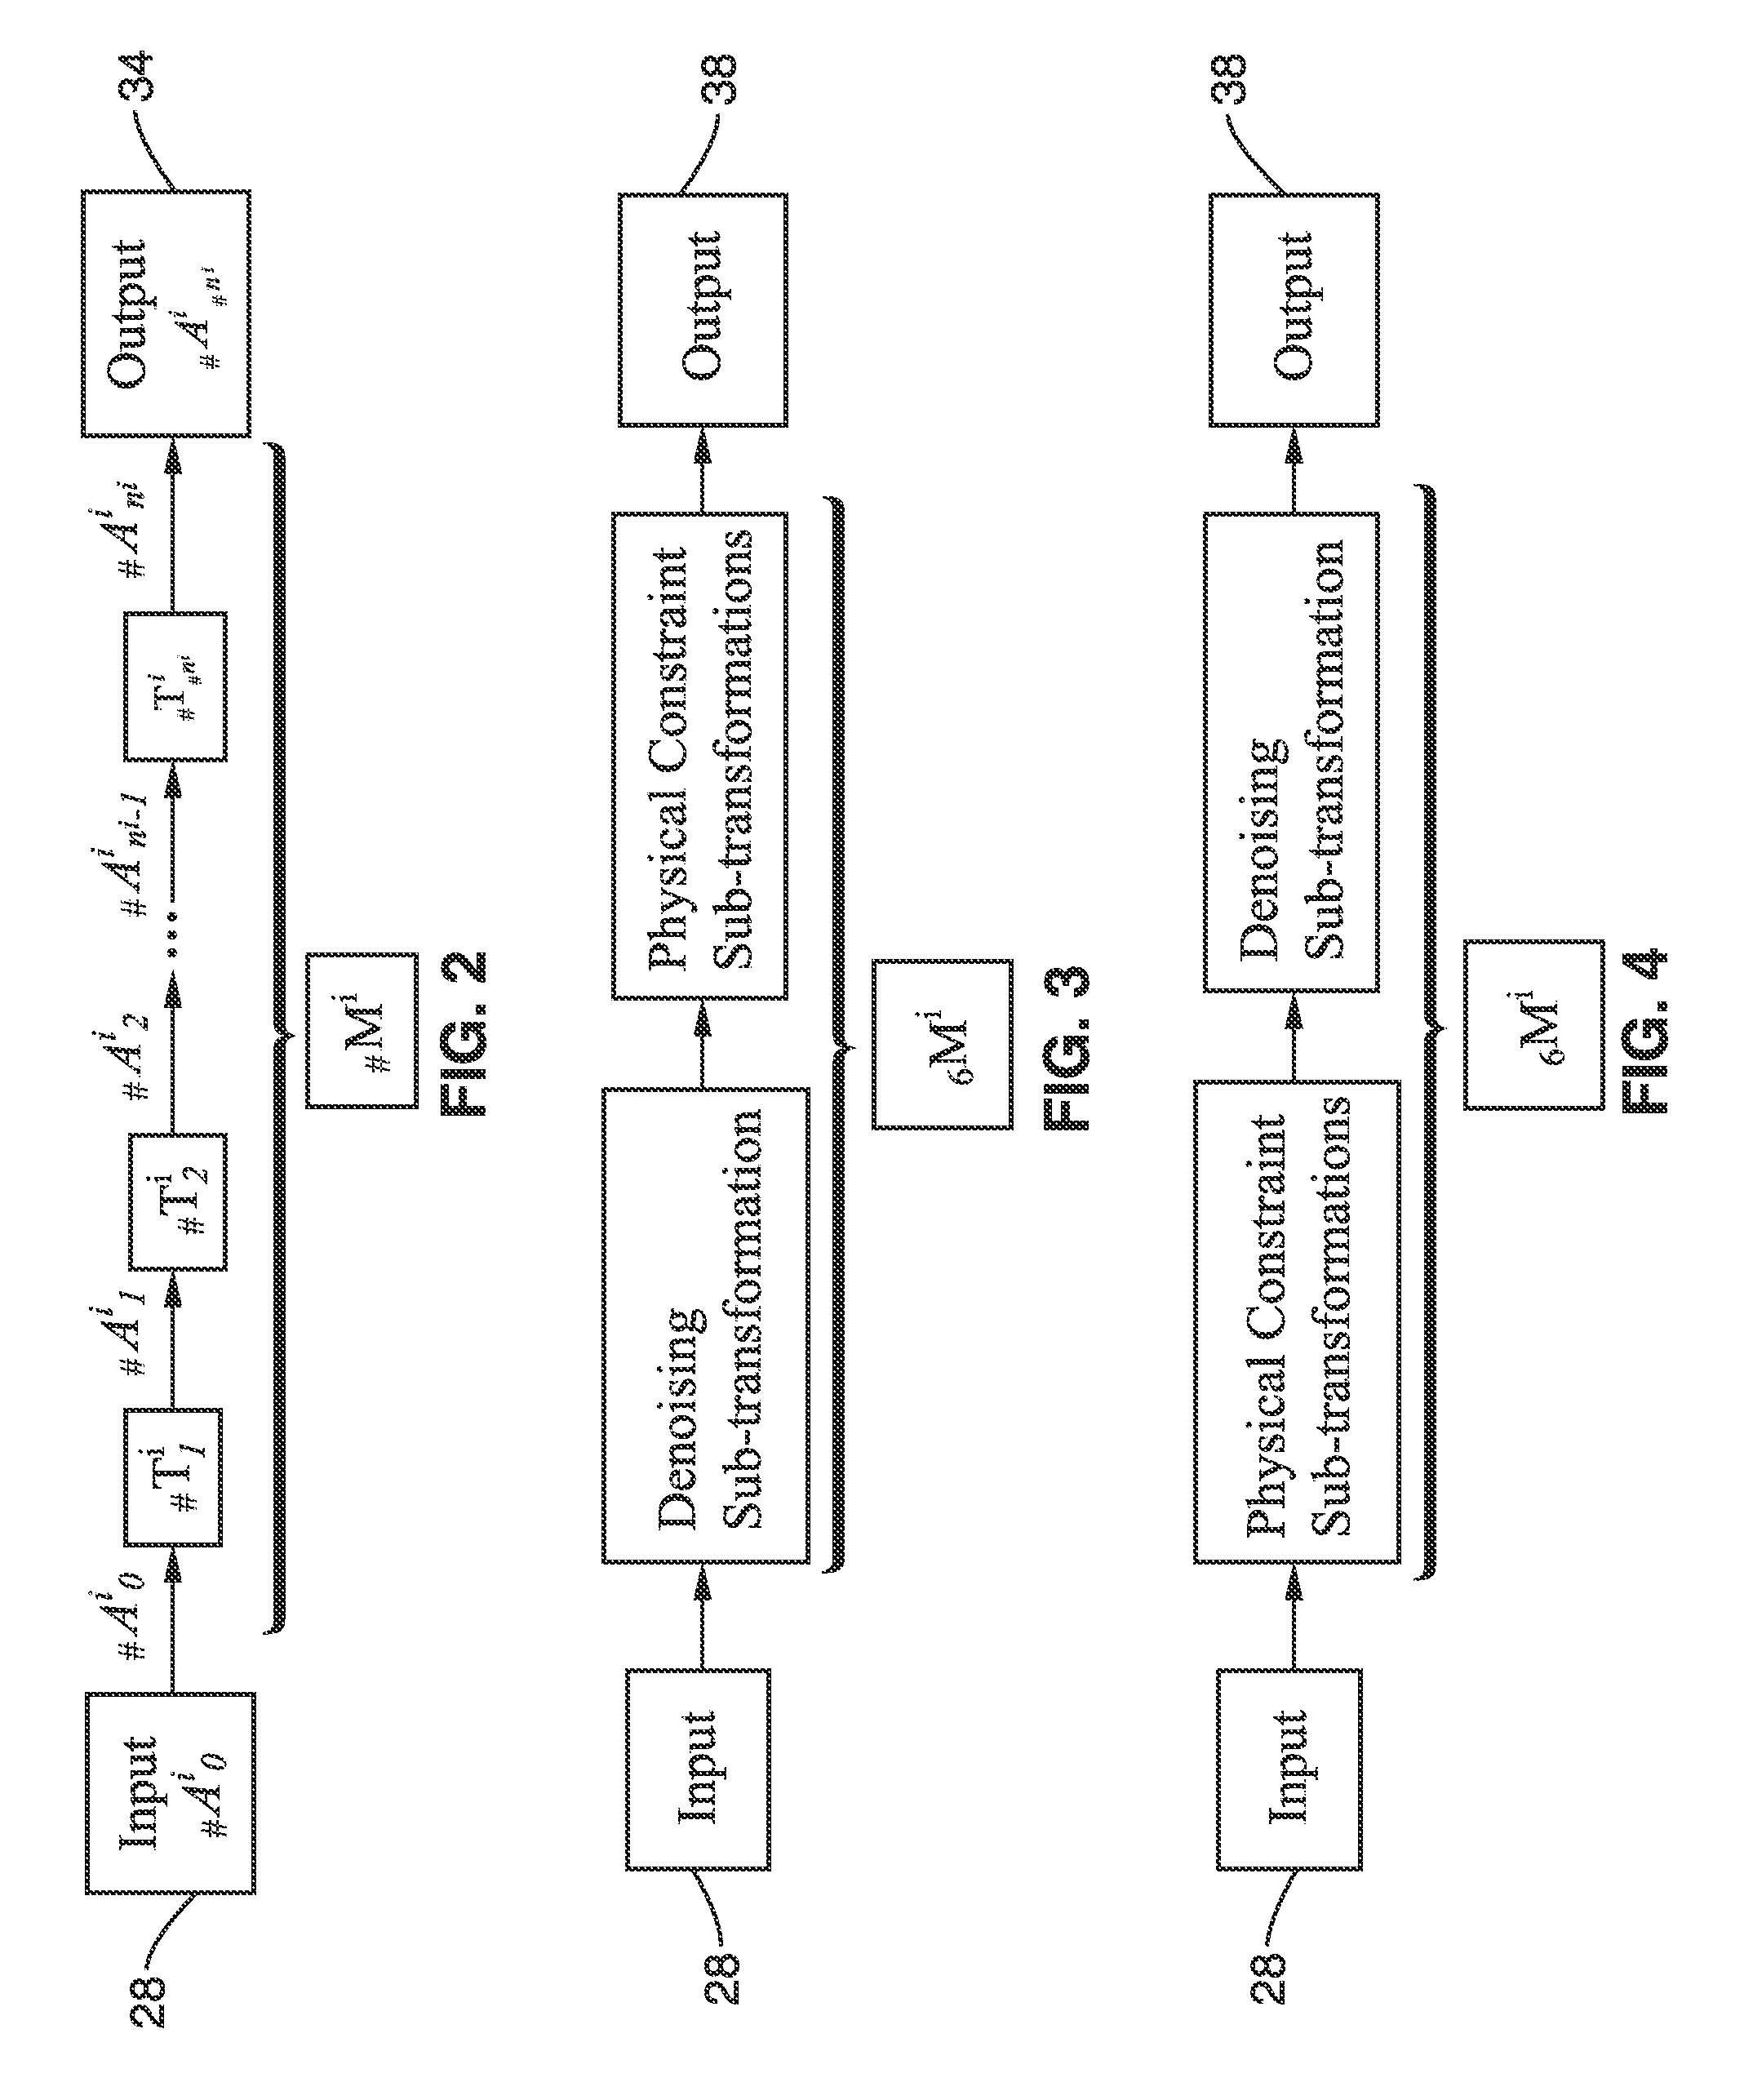 Incorporation of mathematical constraints in methods for dose reduction and image enhancement in tomography